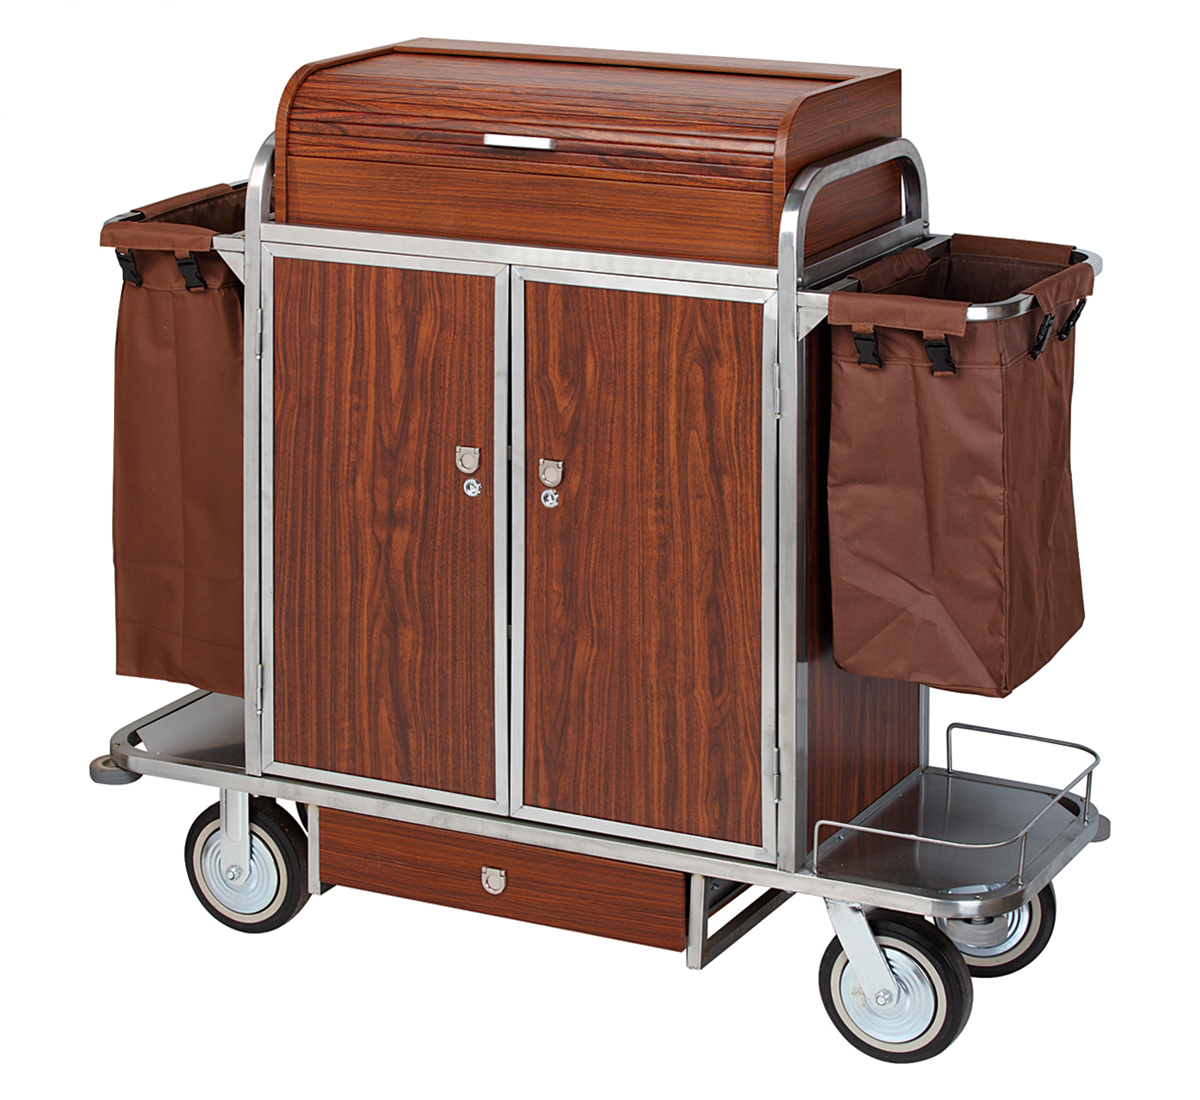 S S frame with wooden Shelves Housekeeping Trolley 